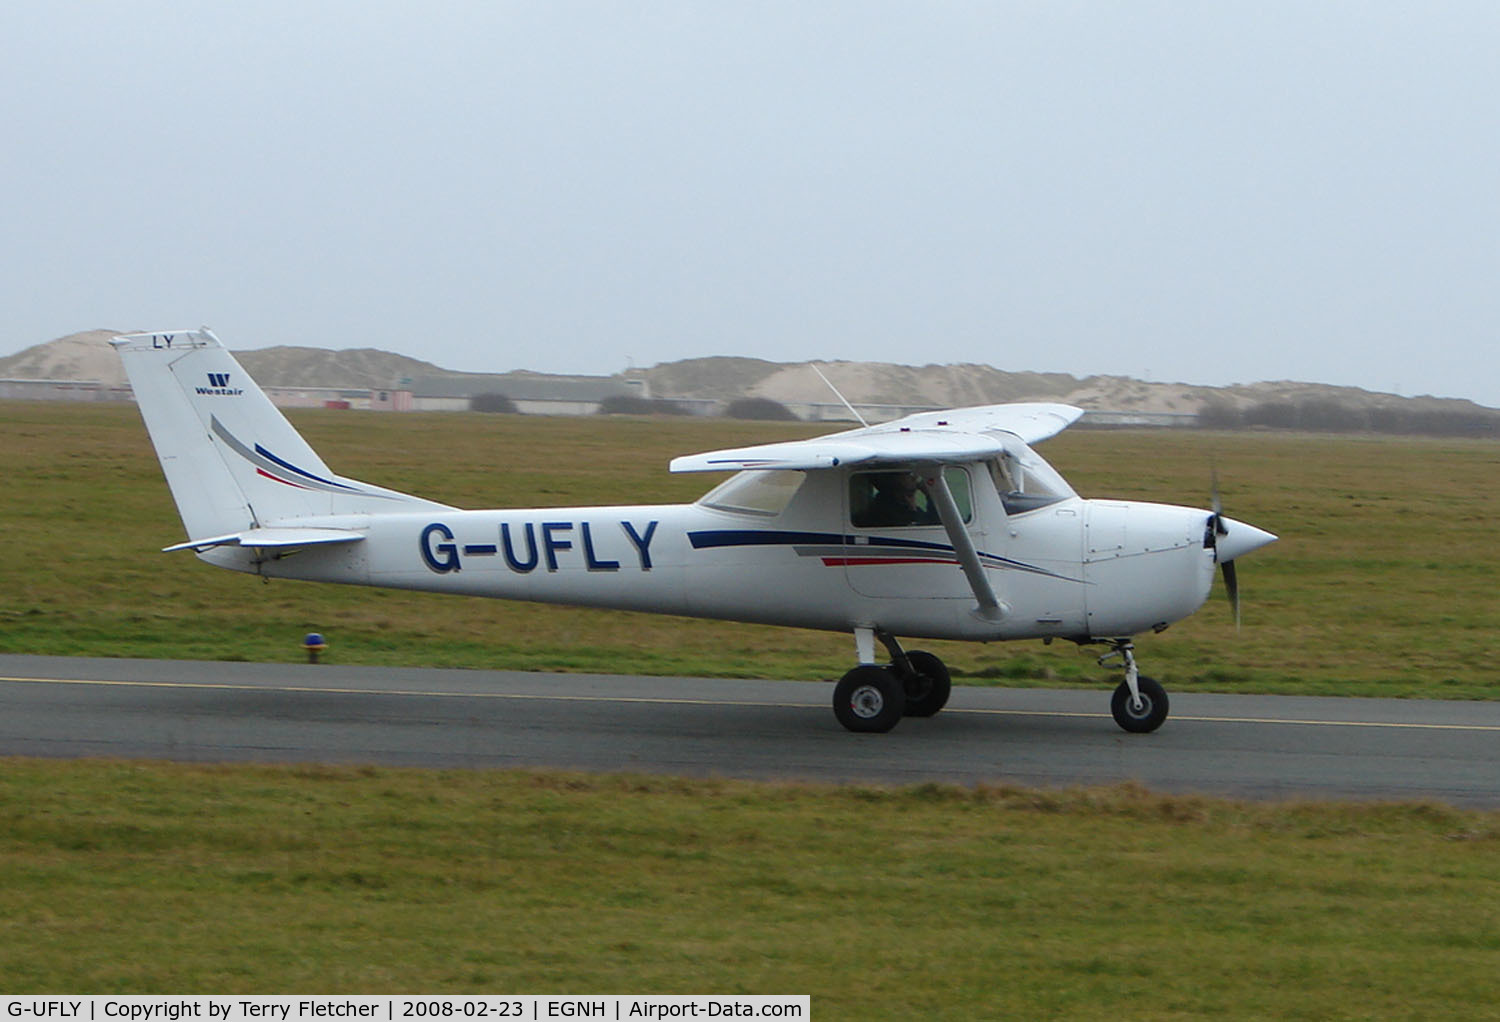 G-UFLY, 1967 Reims F150H C/N 0264, 40 year old Cessna taxies out at Blackpool